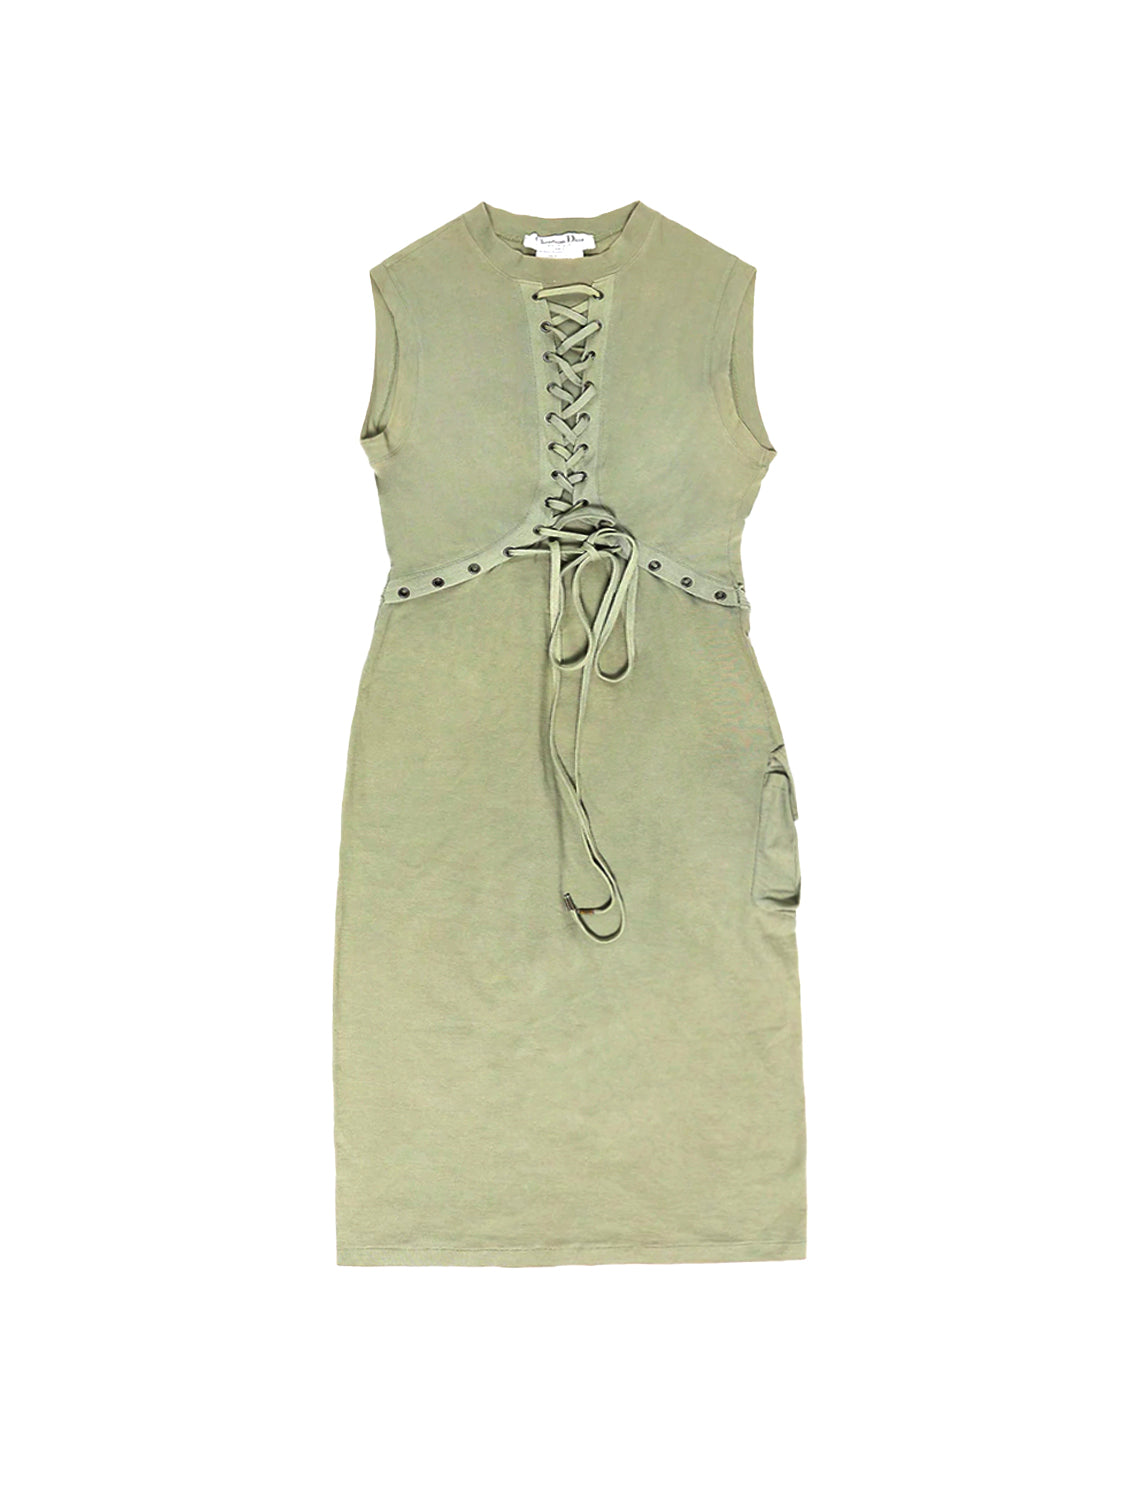 Christian Dior S/S 2003 Green Lace-Up Dress